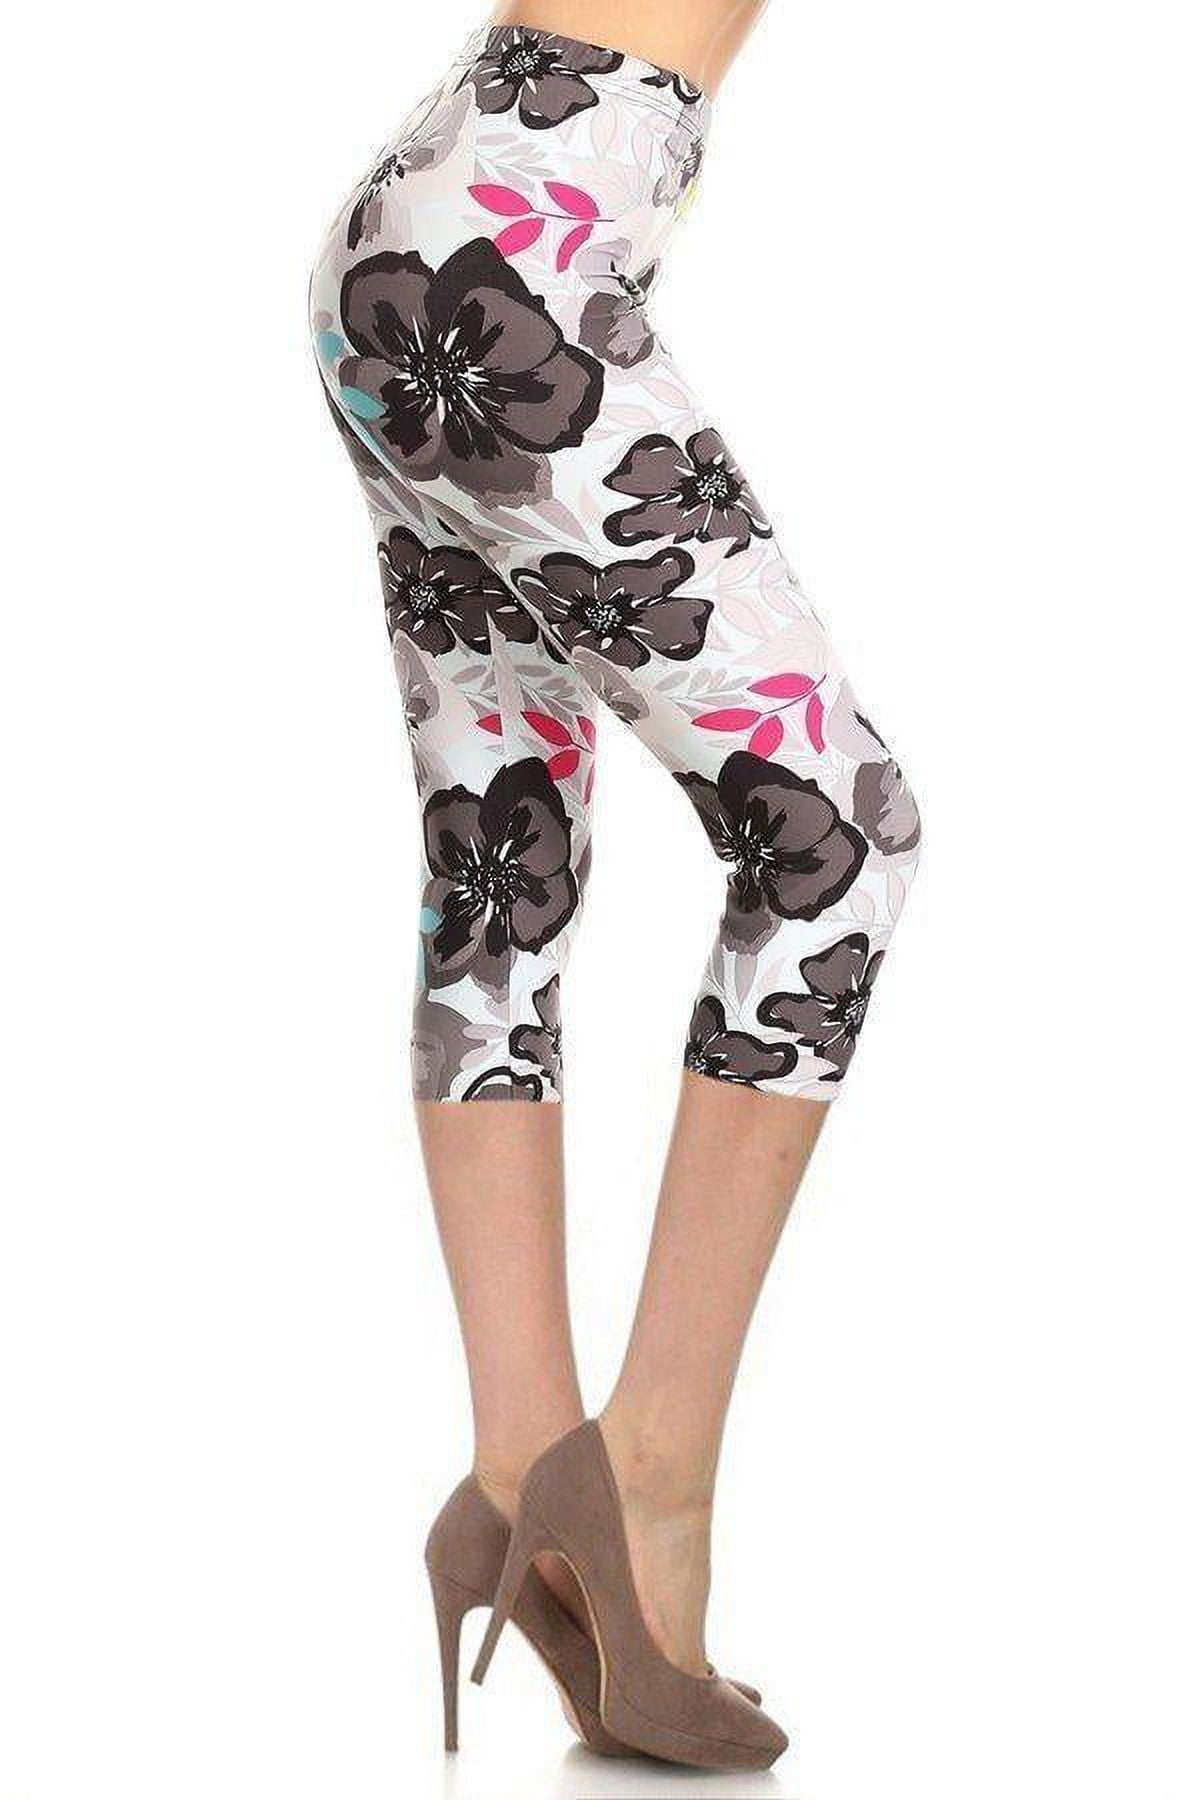 Spalding Women's Activewear Pace Legging with 2 Pockets, Paradise Floral,  Small at  Women's Clothing store